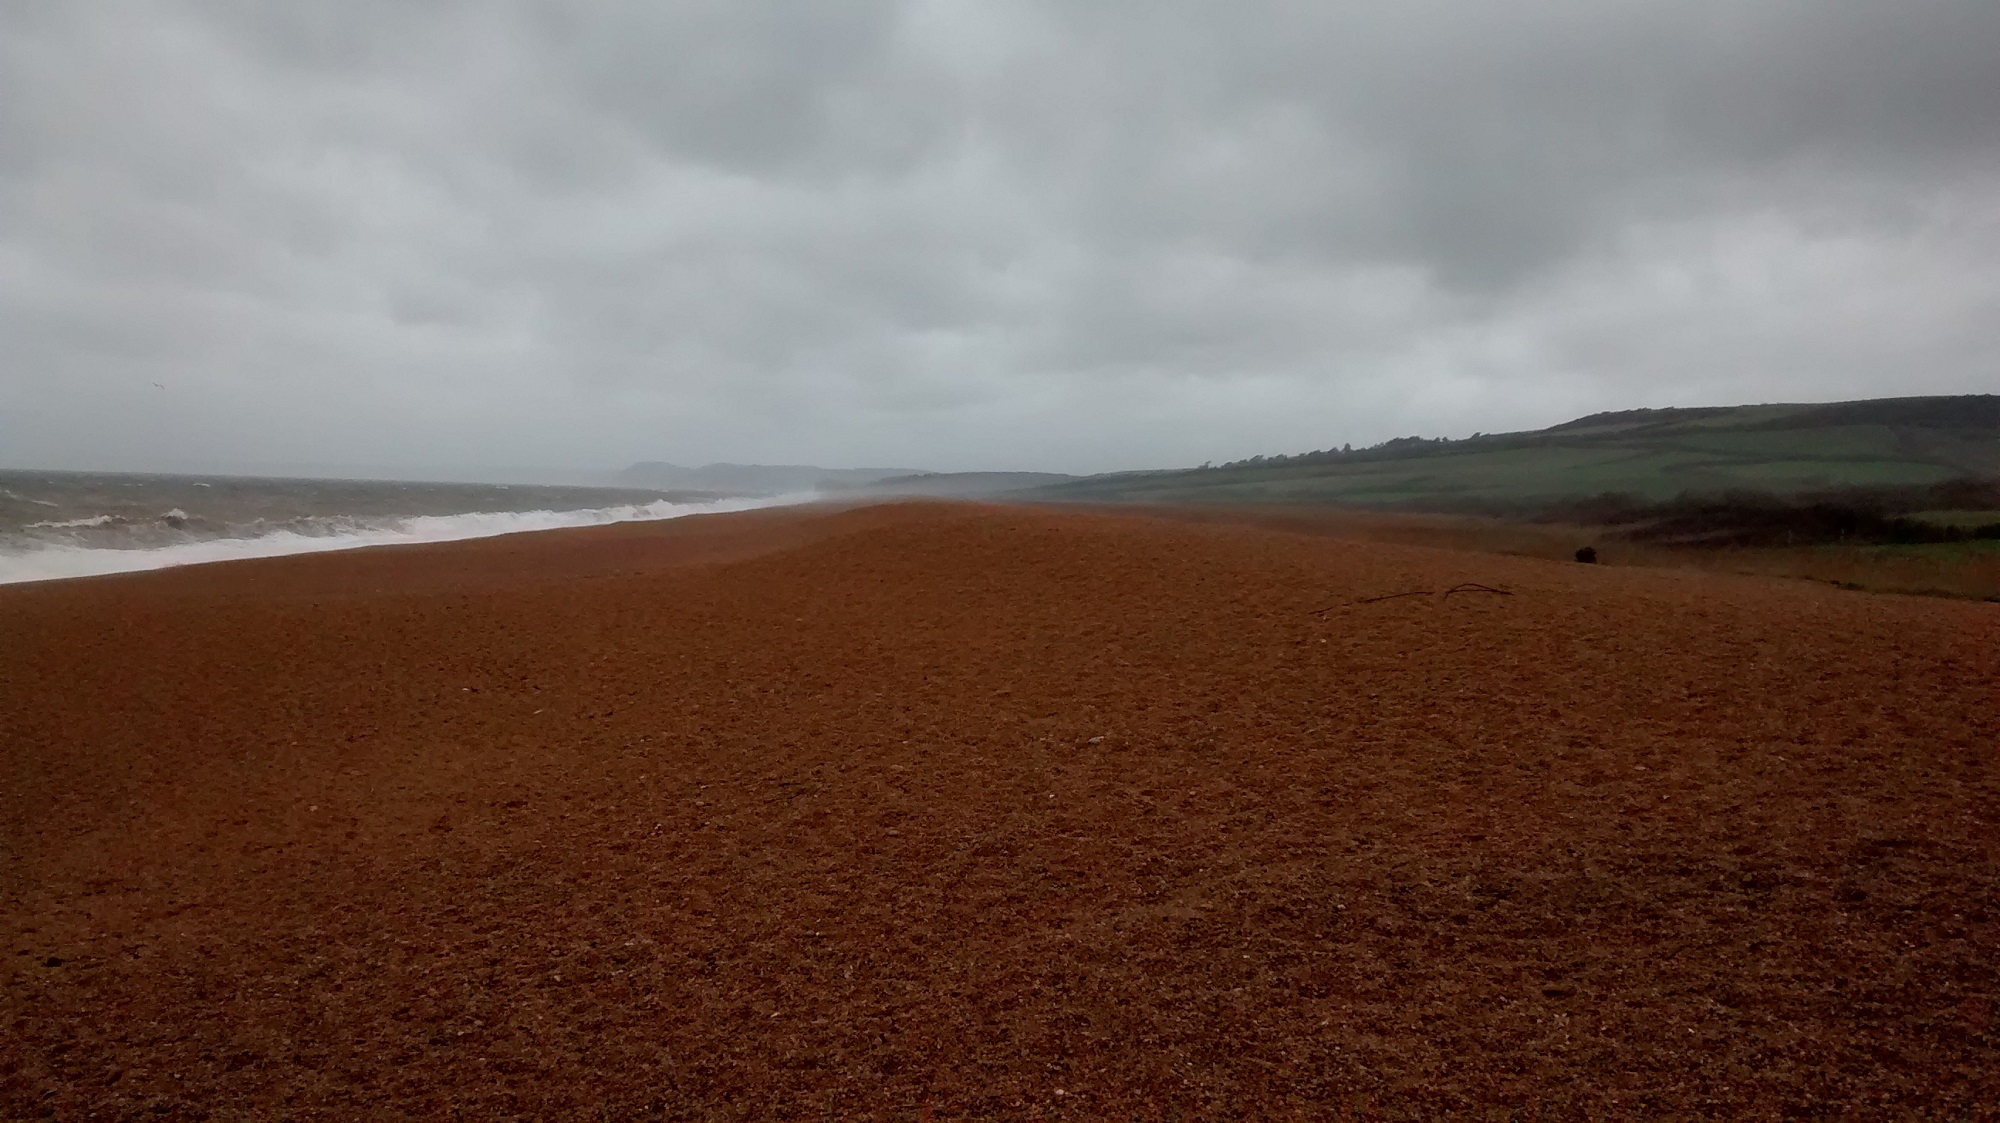 A shingle beach under a cloudy sky in a rural setting. Fields and hills to the right, and sea to the left.